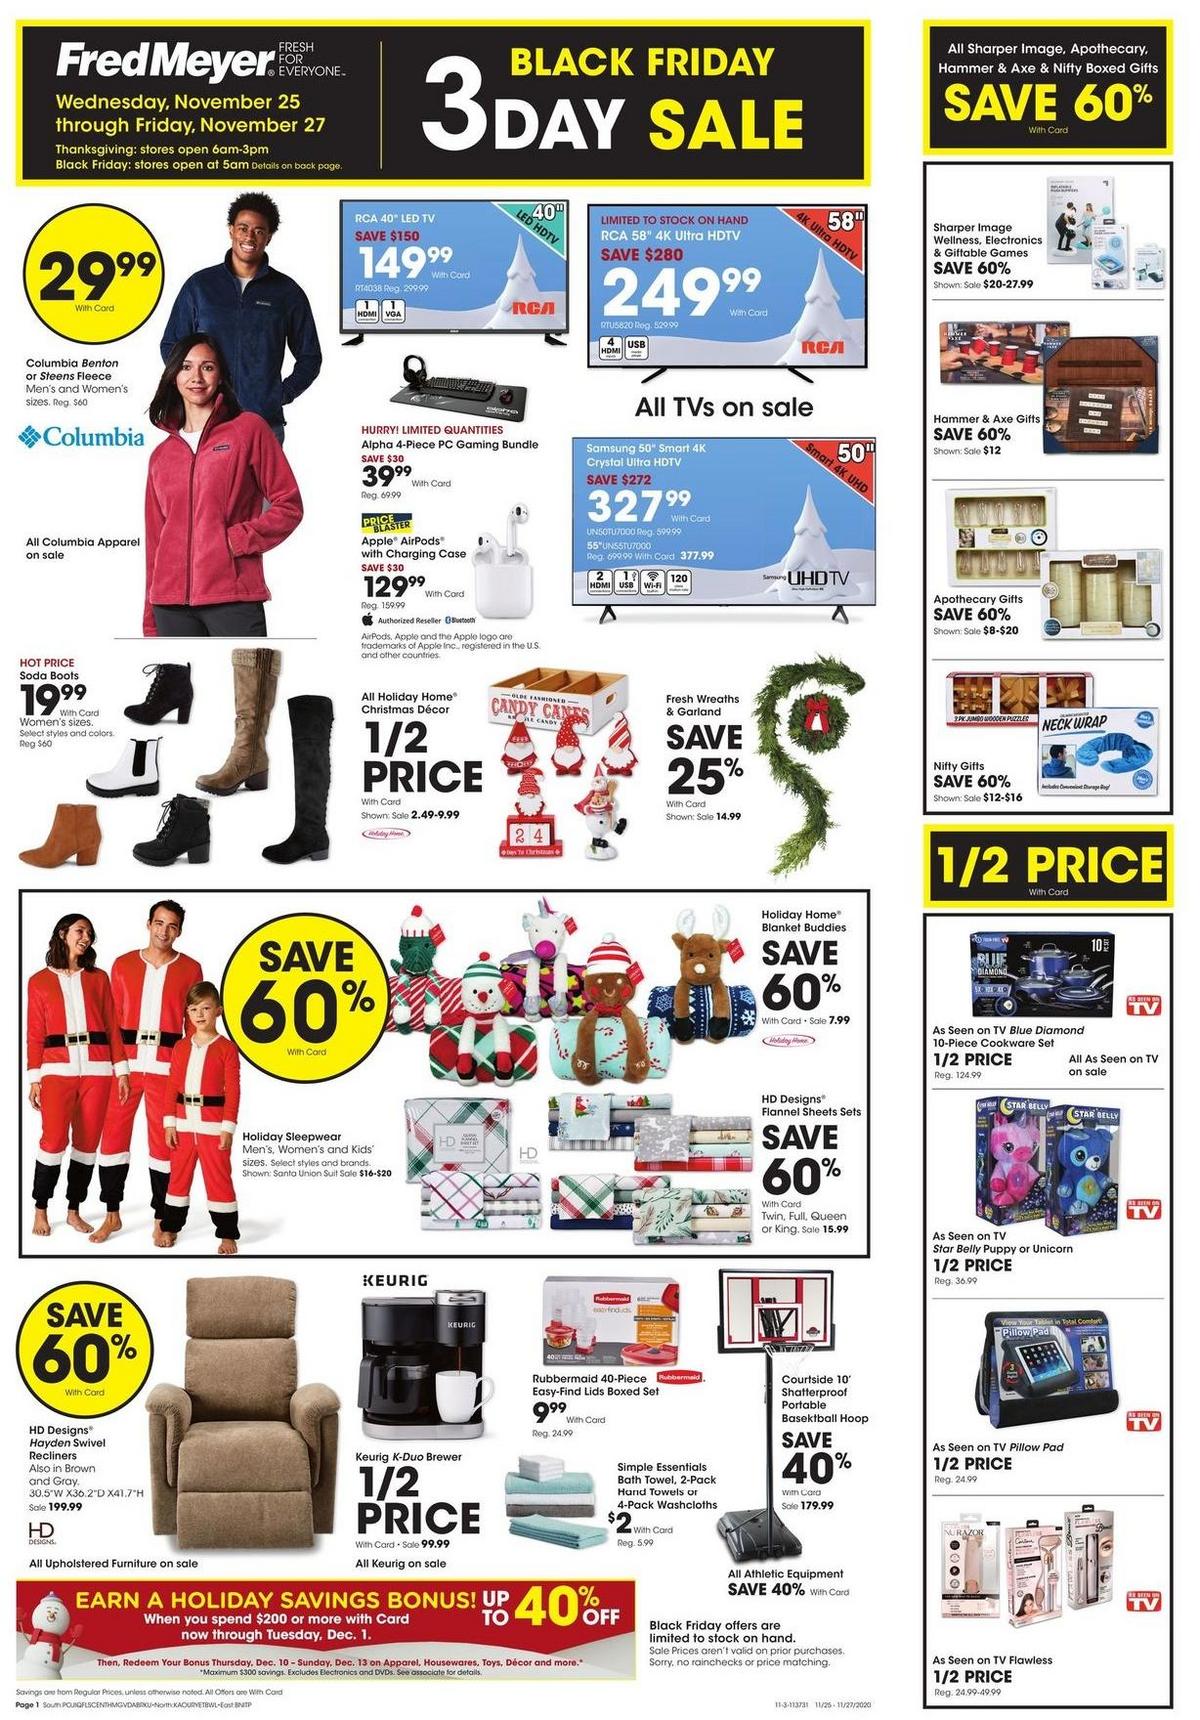 Fred Meyer 3Day Sale Weekly Ad & Specials from November 25